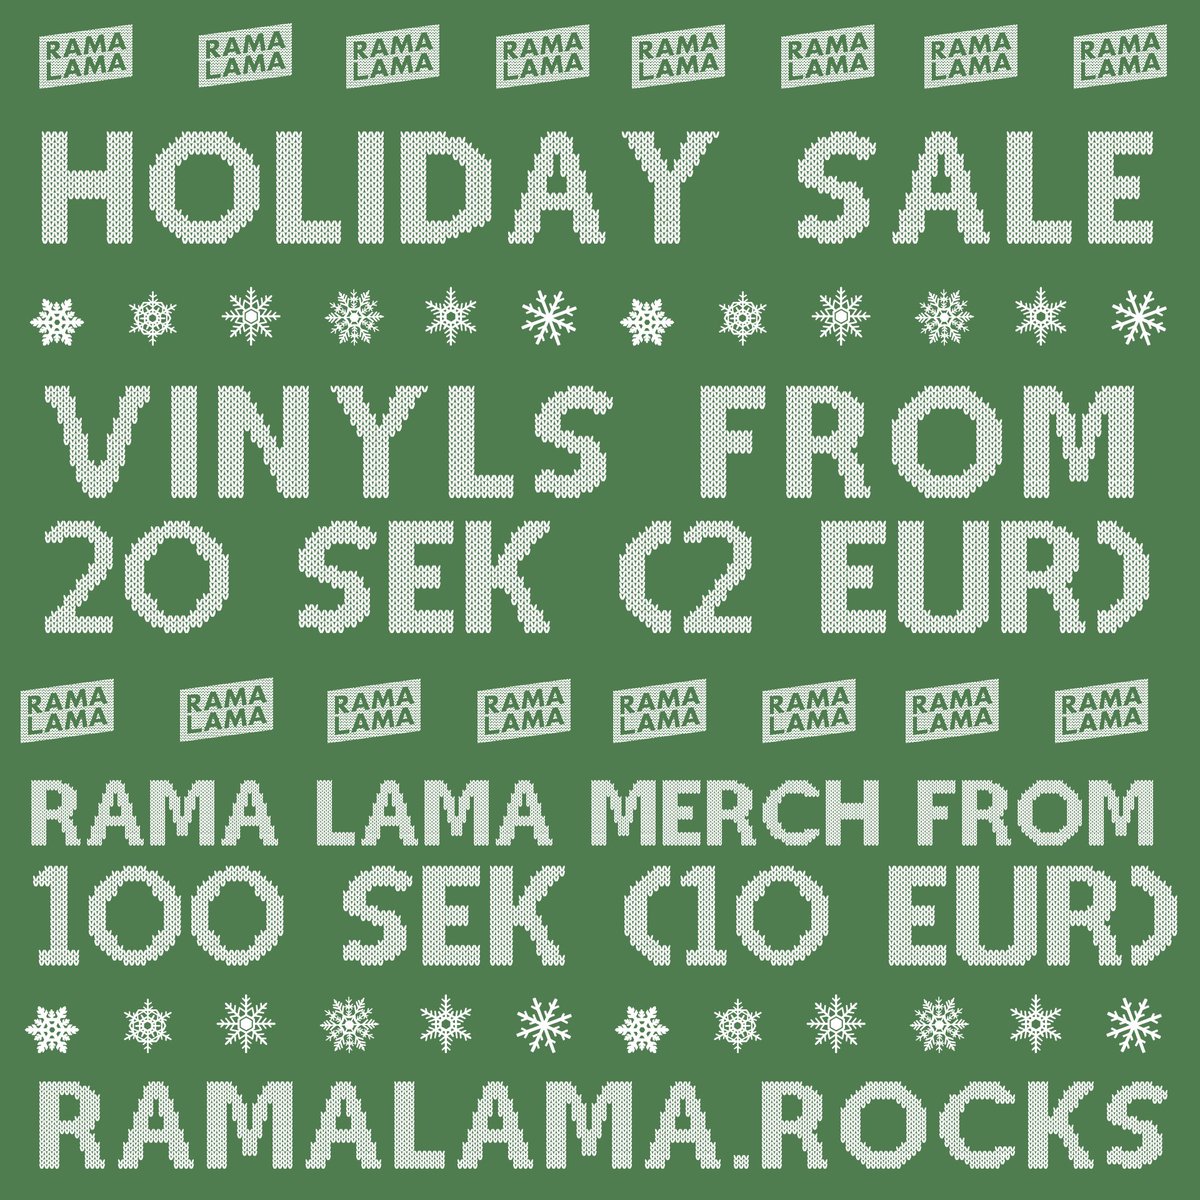 It's the most wonderful time of the year - the Rama Lama holiday sale! Go get that sweet Rama Lama merch and vinyls from Melby, Cat Princess, Steve Buscemi's Dreamy Eyes, Julia Rakel, Kluster B, Delsbo Beach Club, New Feelings and Chez Ali Shop now - ramalama.se/merch